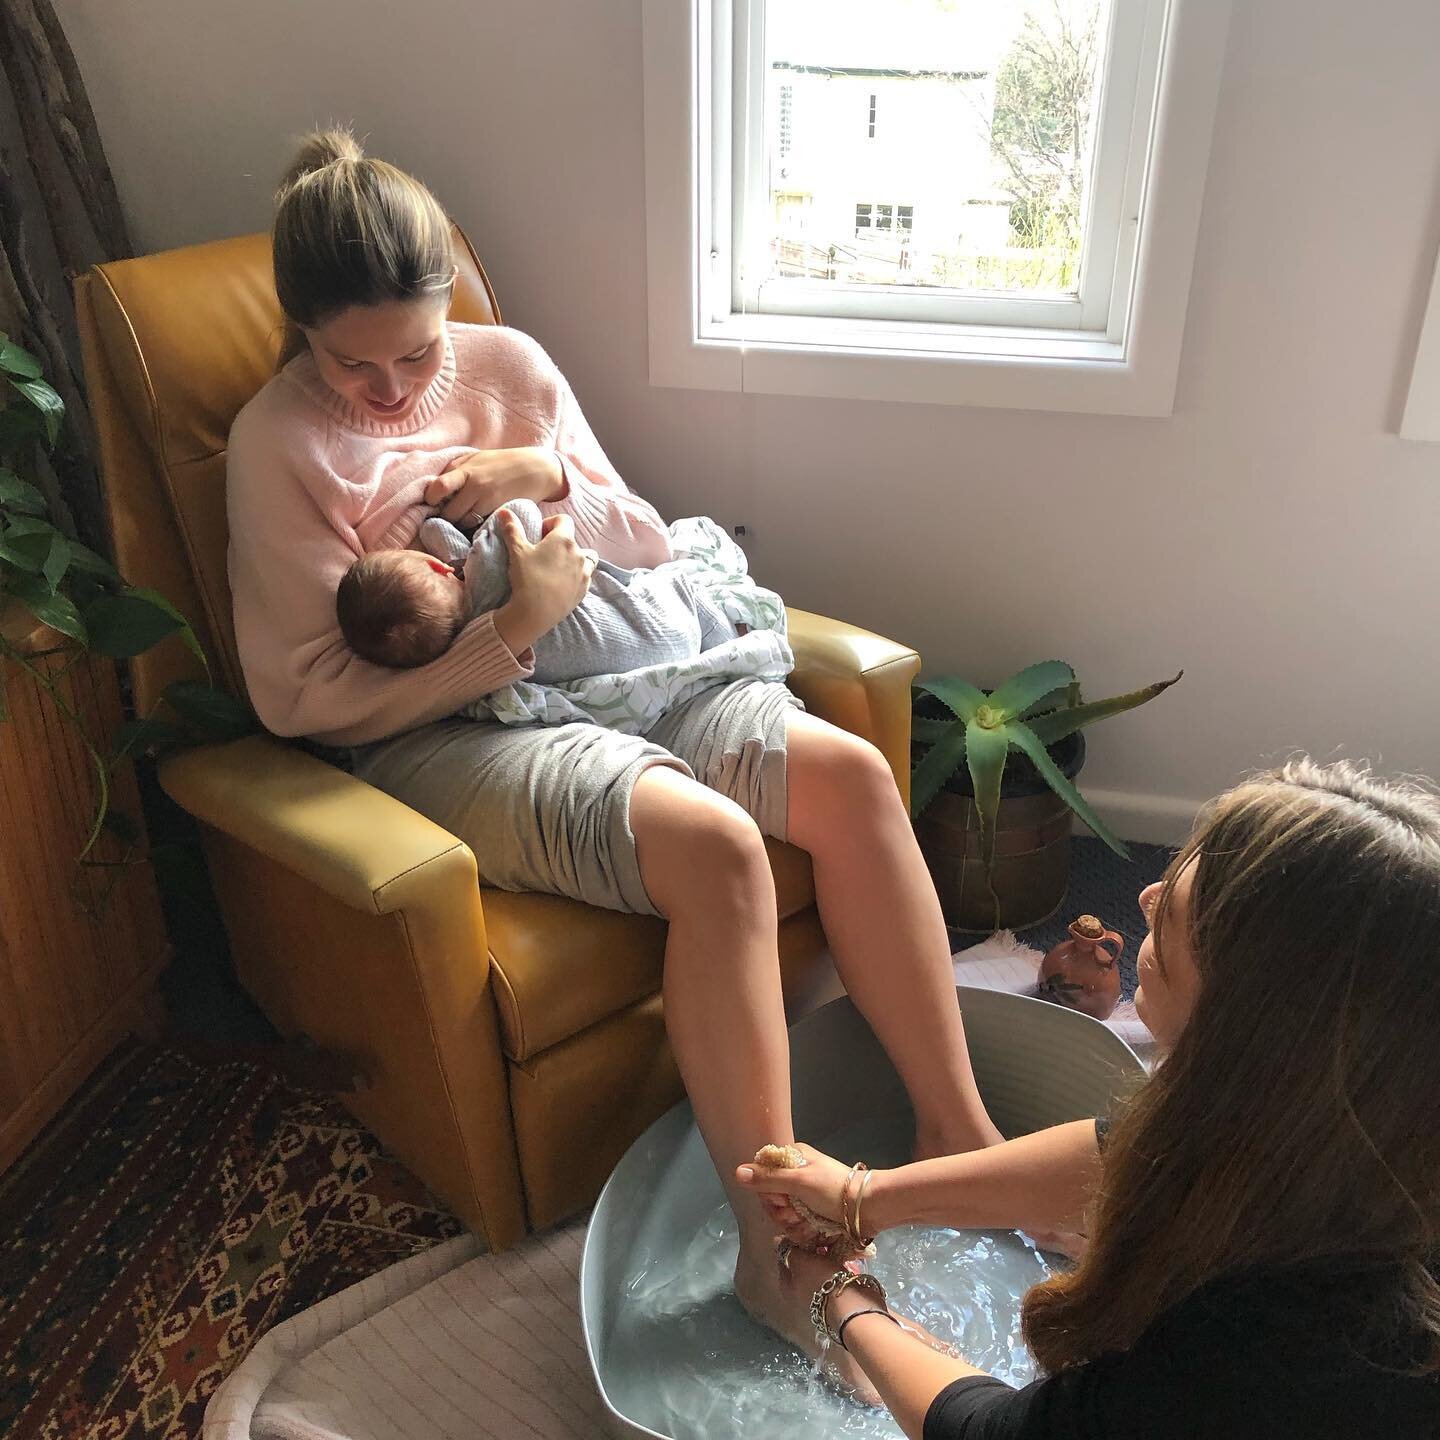 Here I am at roughly 3 weeks postpartum. 

I&rsquo;m receiving a foot soak from my sister-in-law. 

When that finished (as all good things do), I had some gentle bodywork done by my other sister-in-law.

After they each finished weaving their magic o